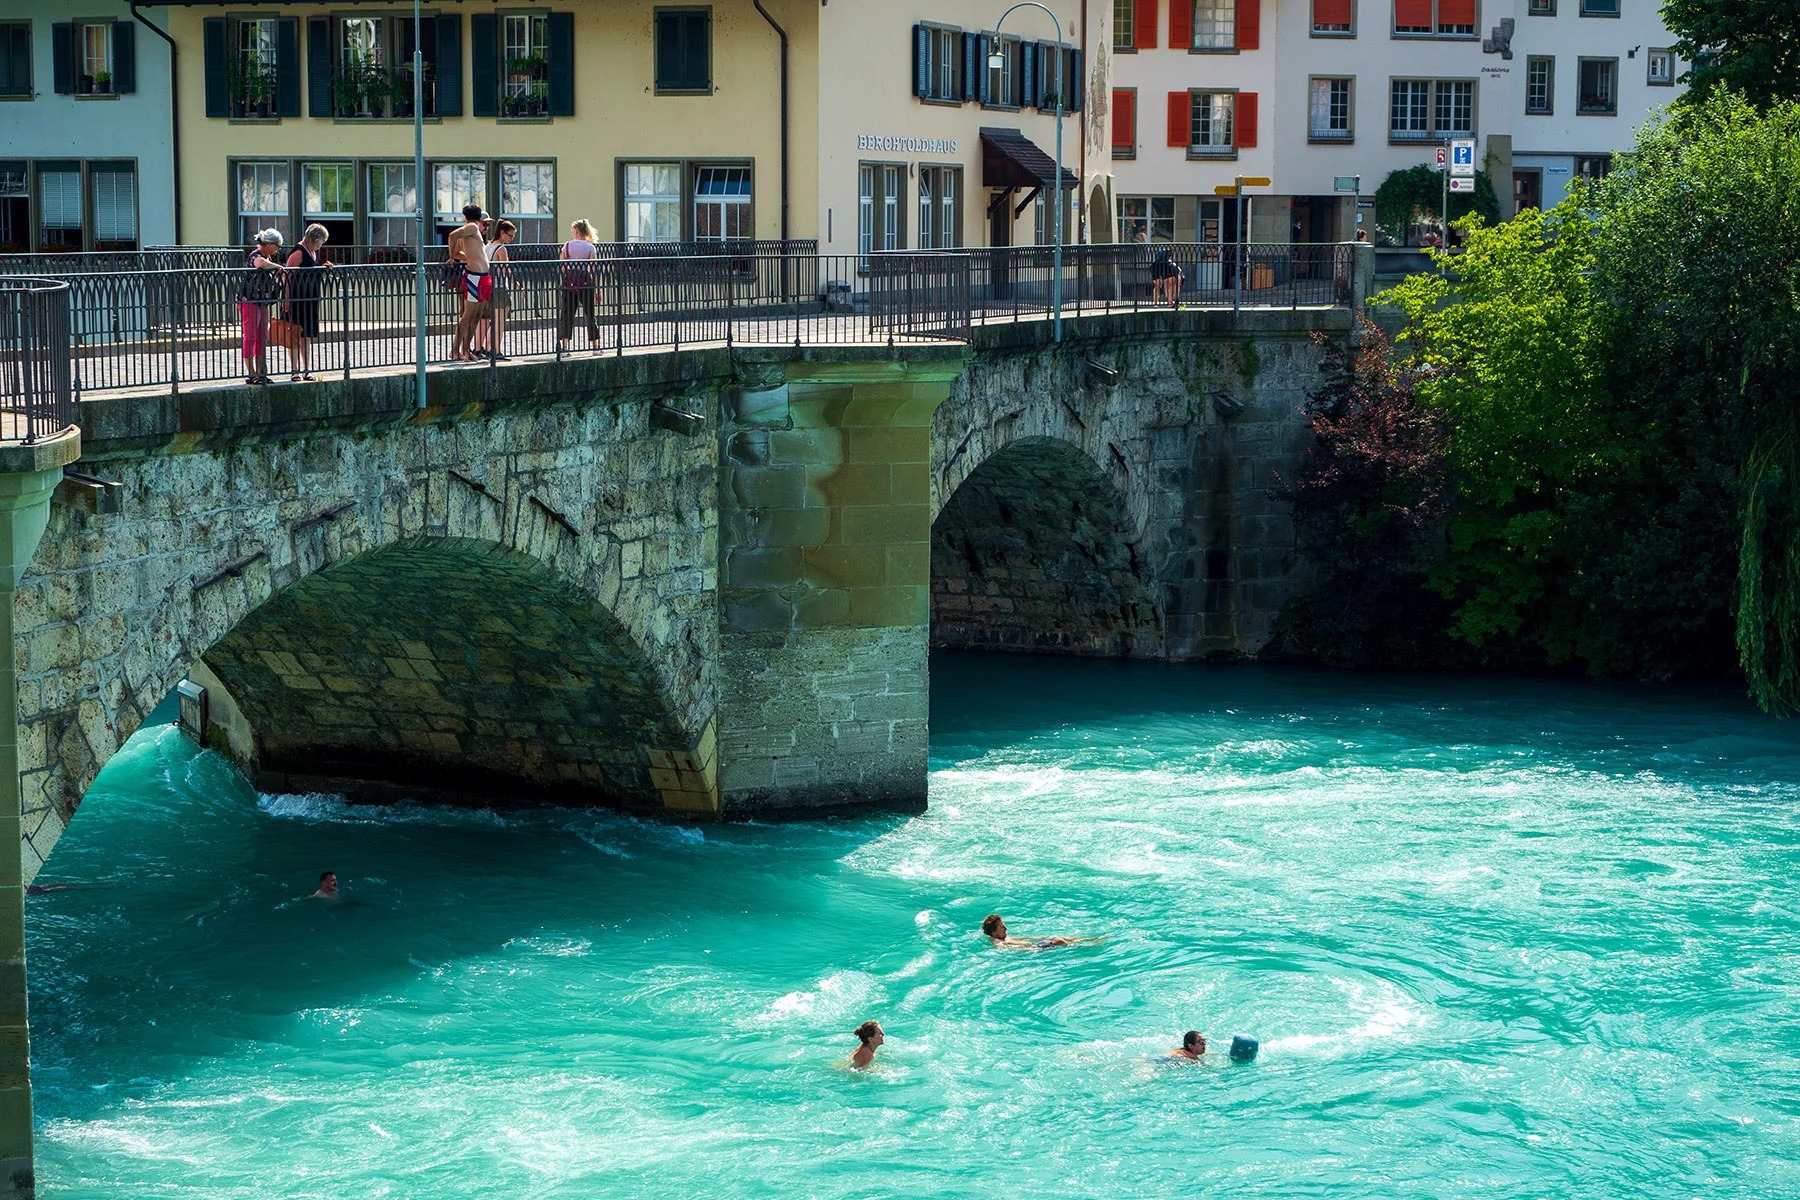 Swimmers on the River Aare in Bern